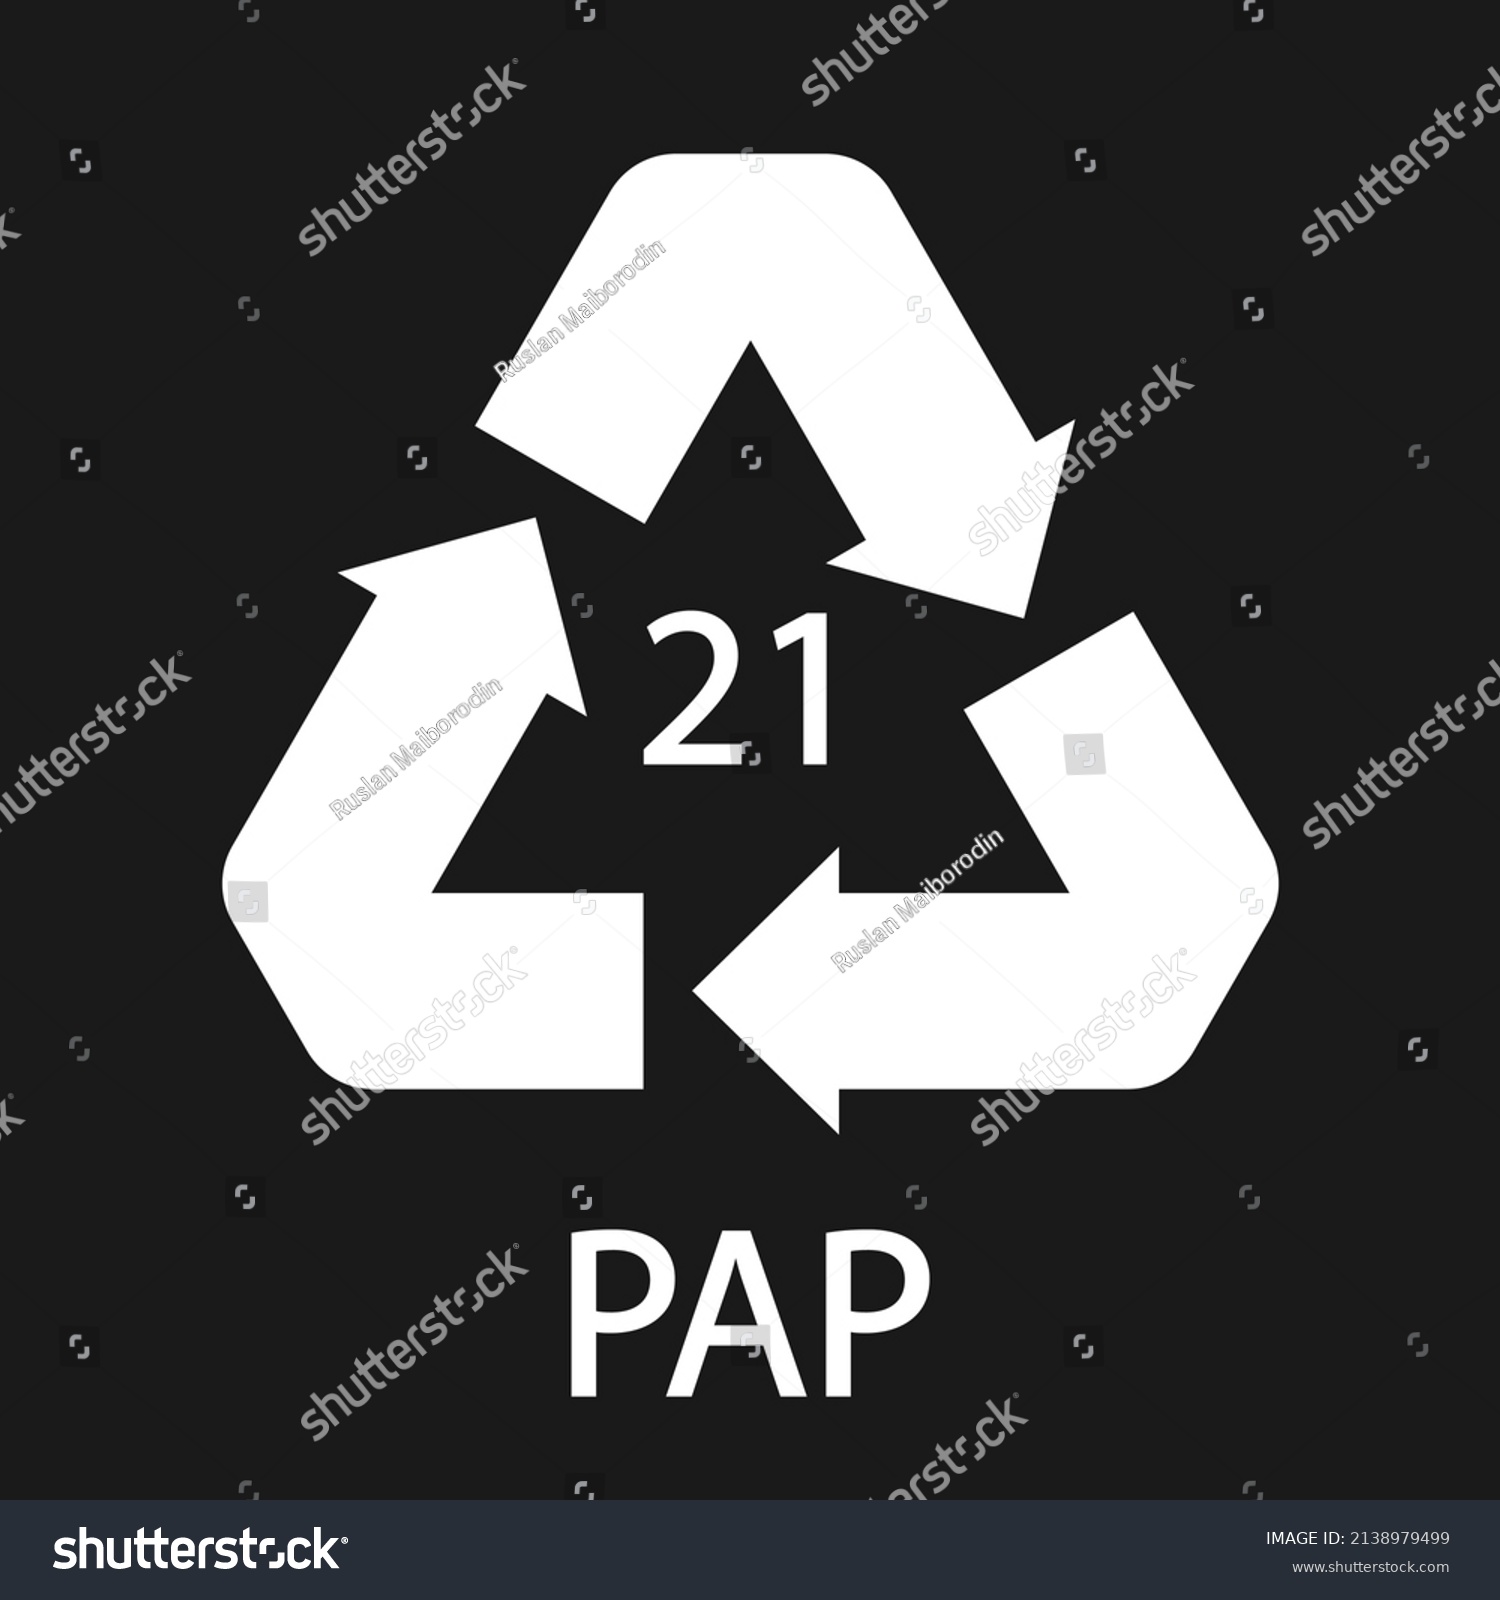 SVG of Paper recycling symbol PAP 21 other mixed paper. Vector illustration svg